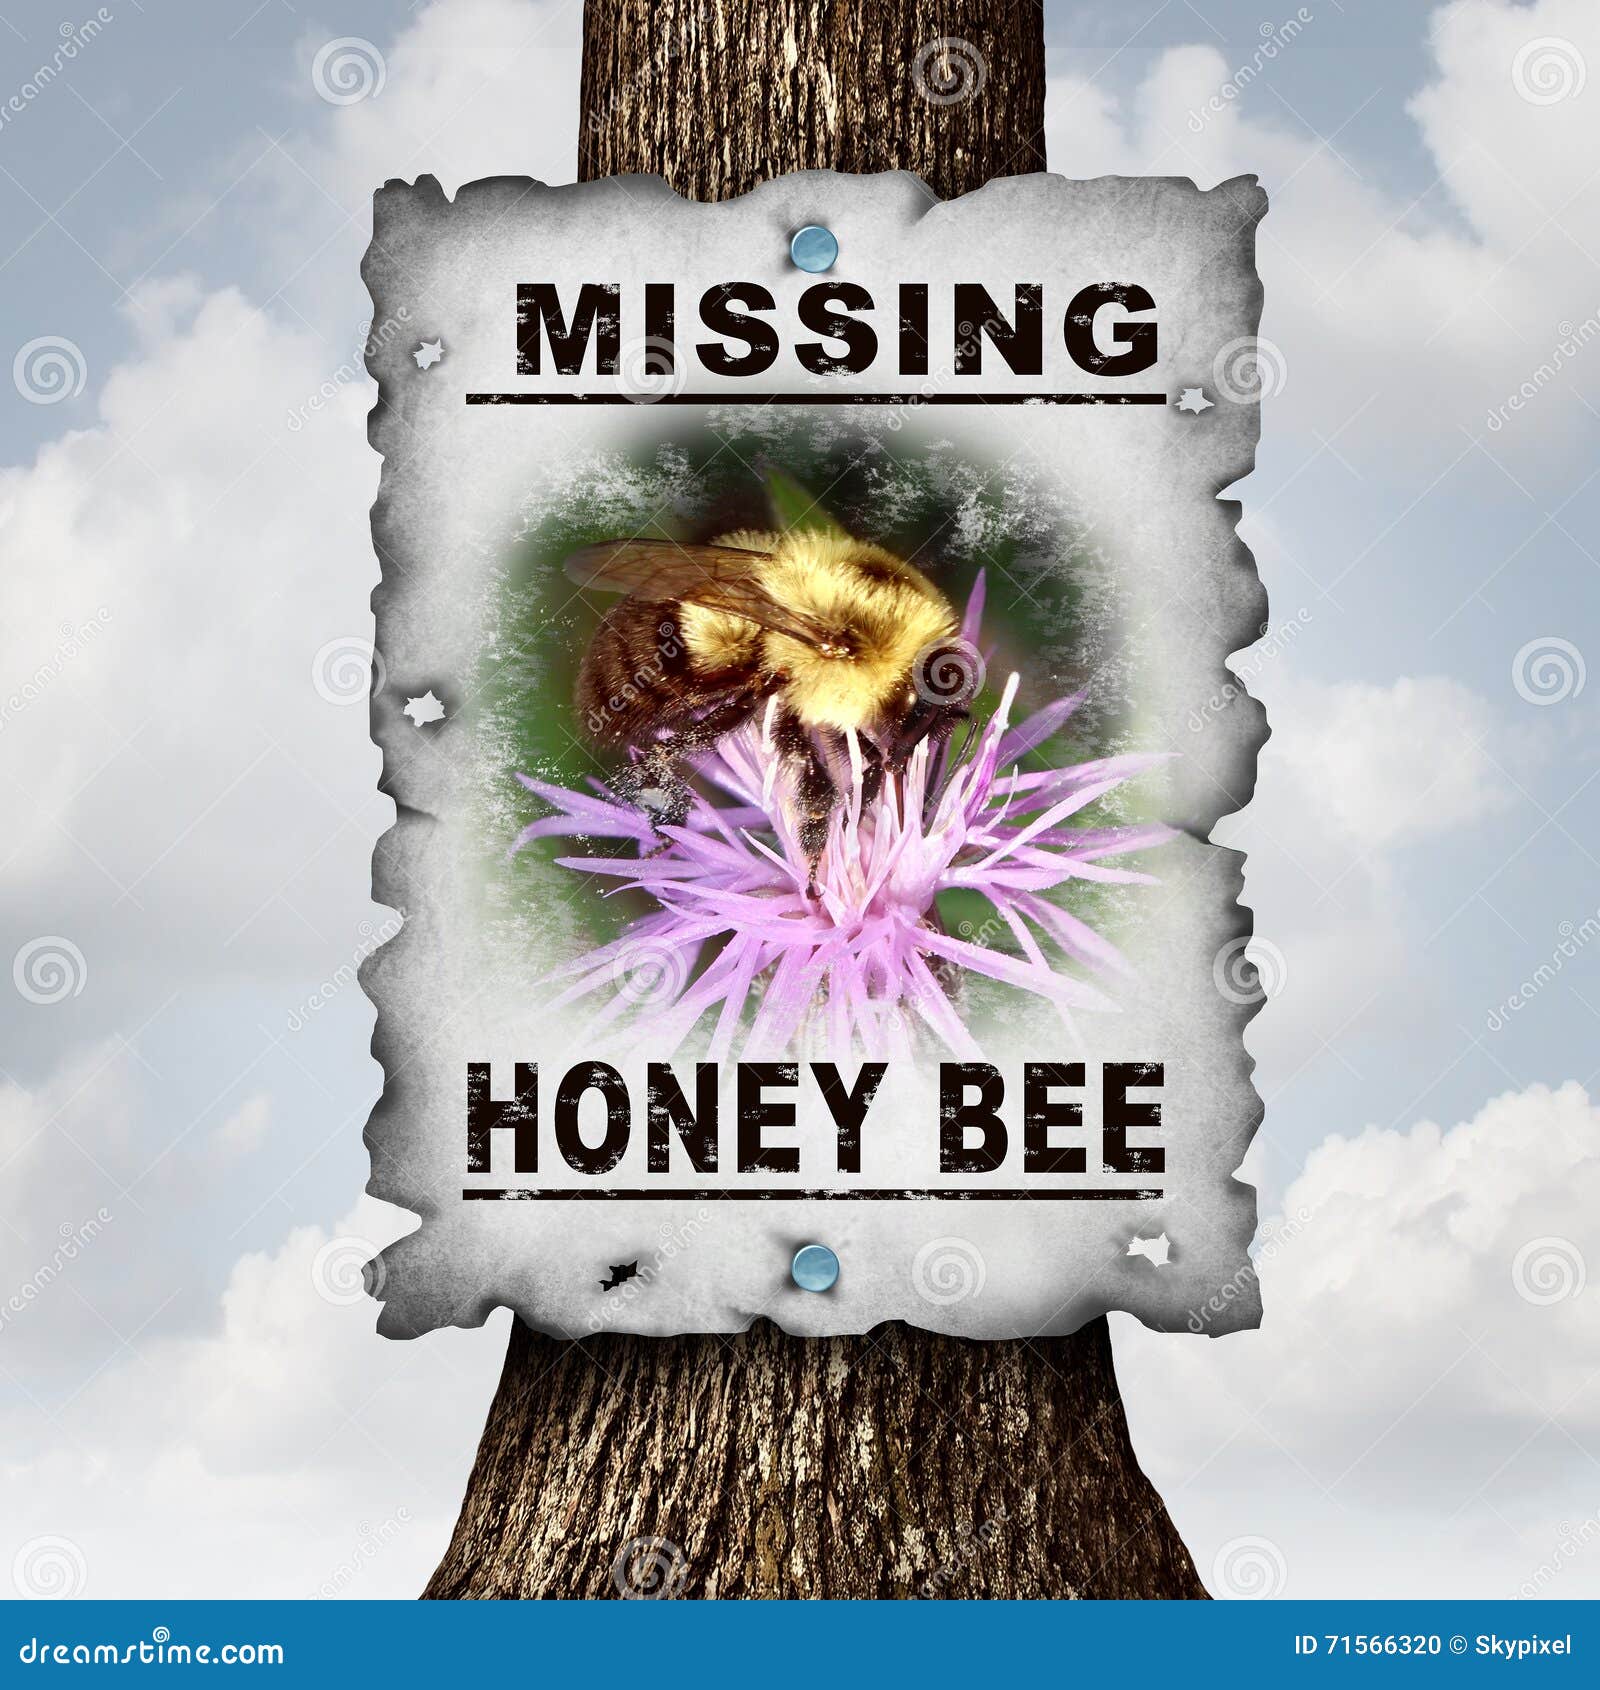 honey-bee-missing-concept-disappearing-bees-message-sign-as-agriculture-symbol-farming-pollination-crisis-as-decline-71566320.jpg